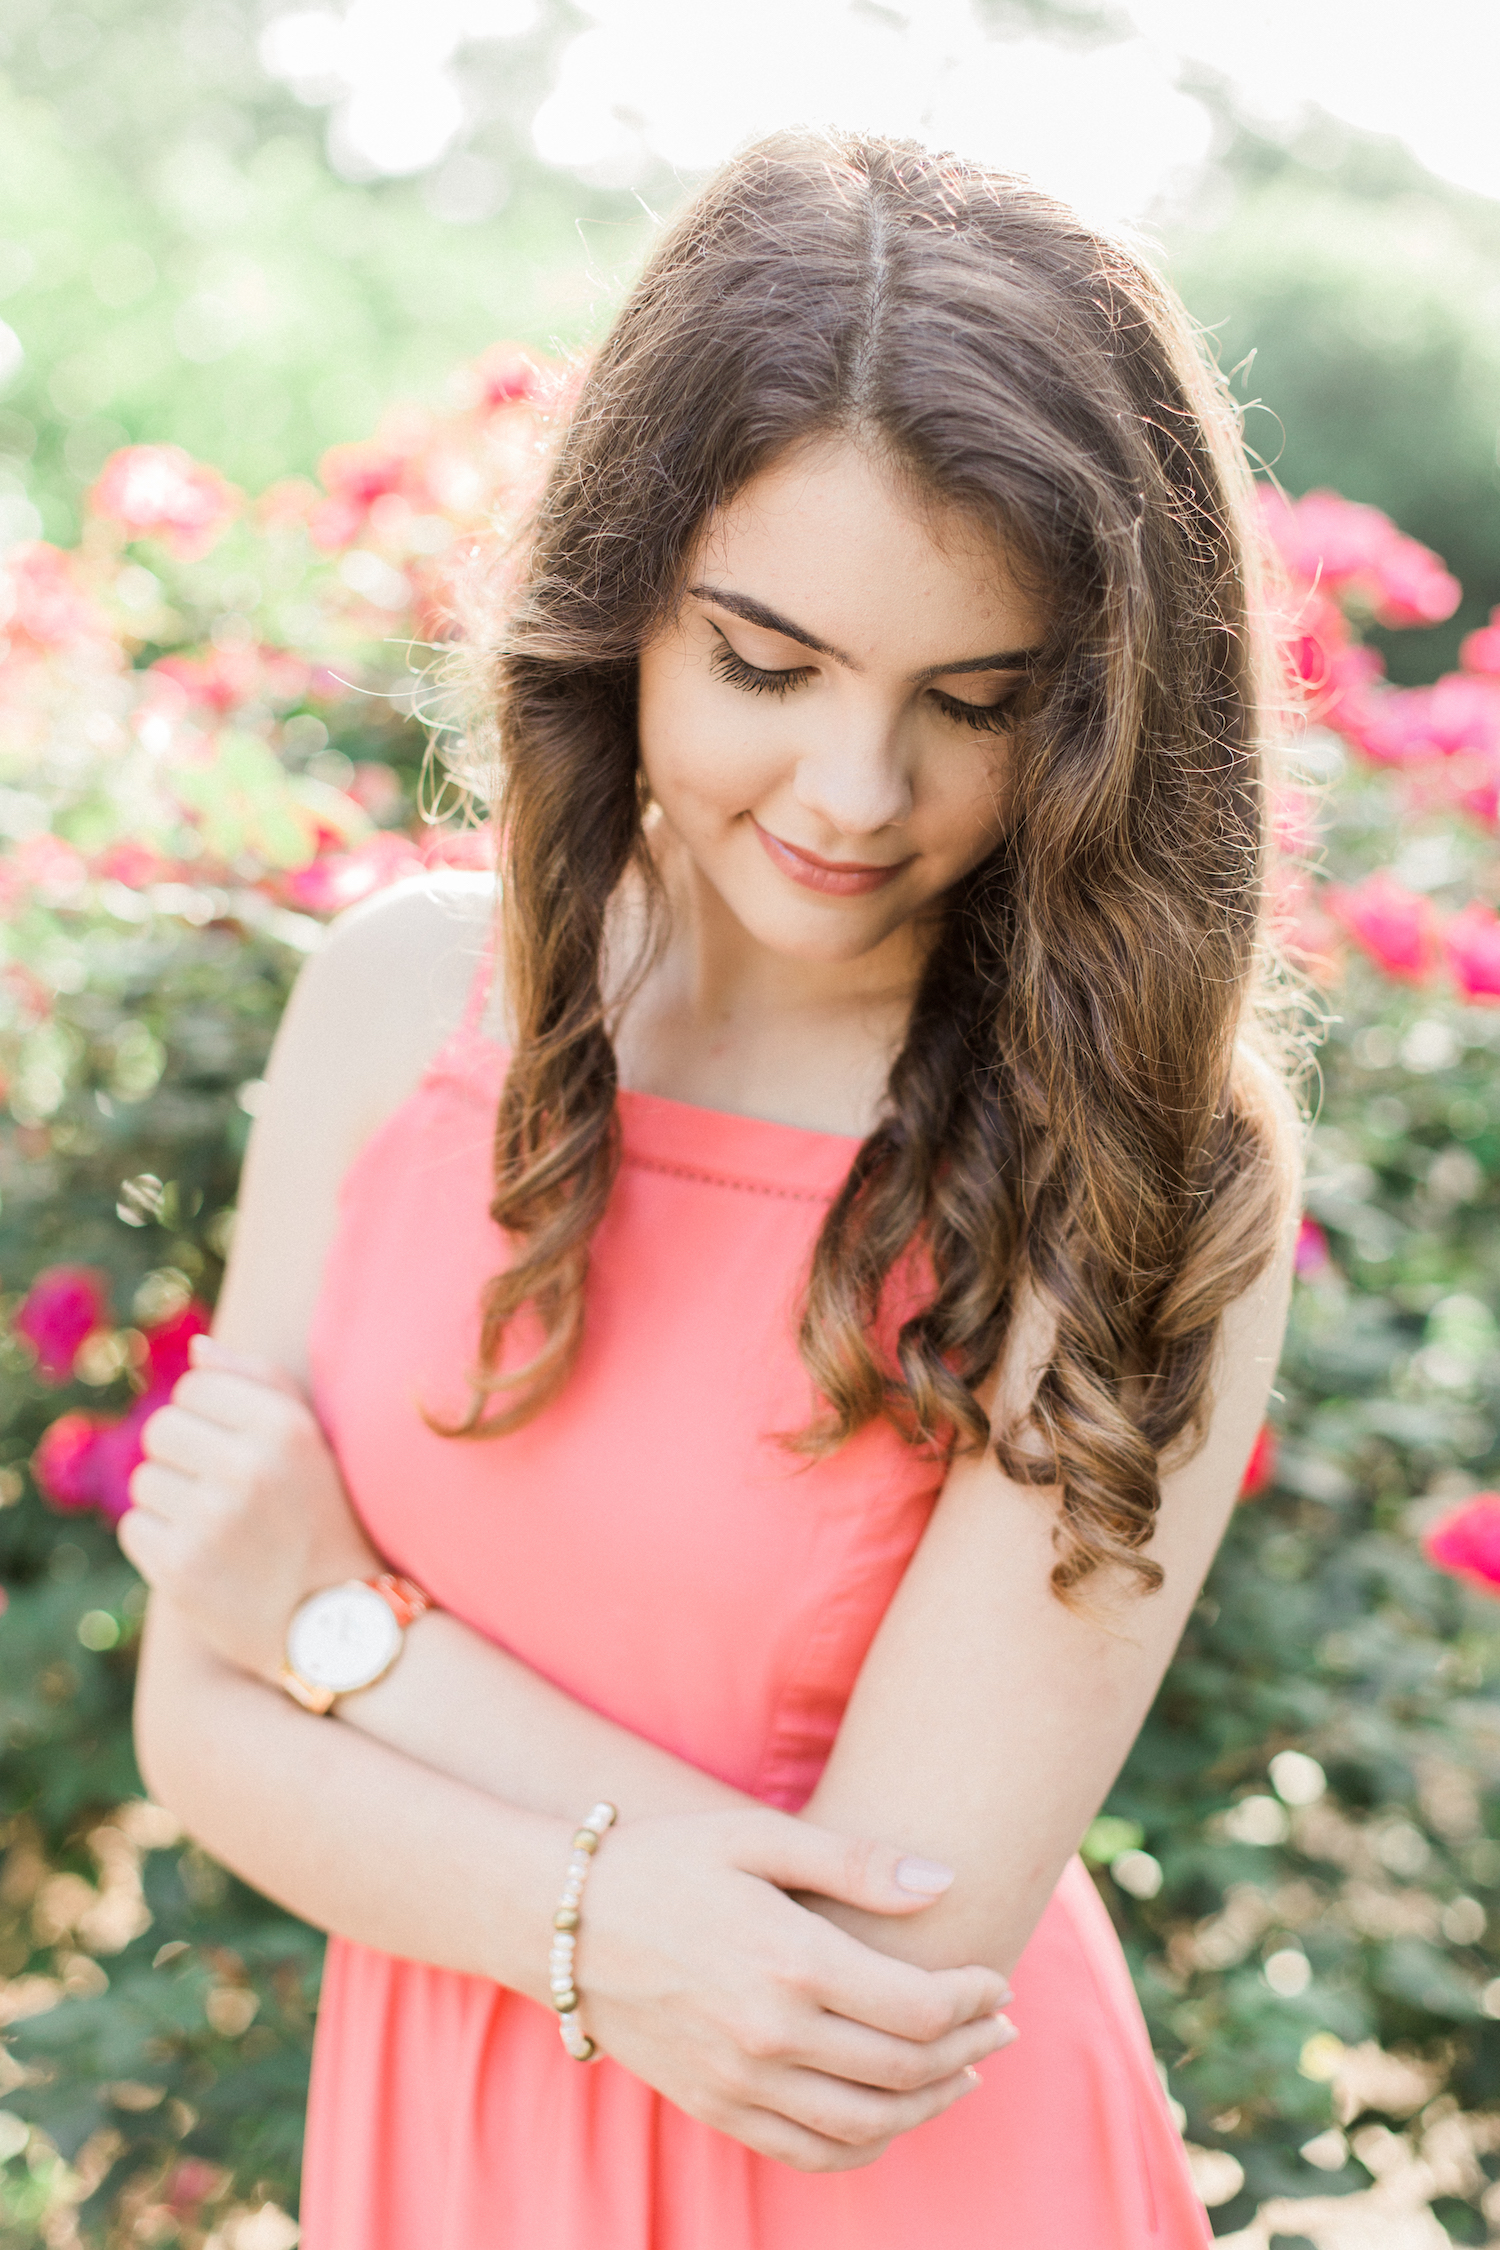 Summer time high school senior session at Vine Mansion Park by Kesia Marie Photography. Featuring feminine, garden details.